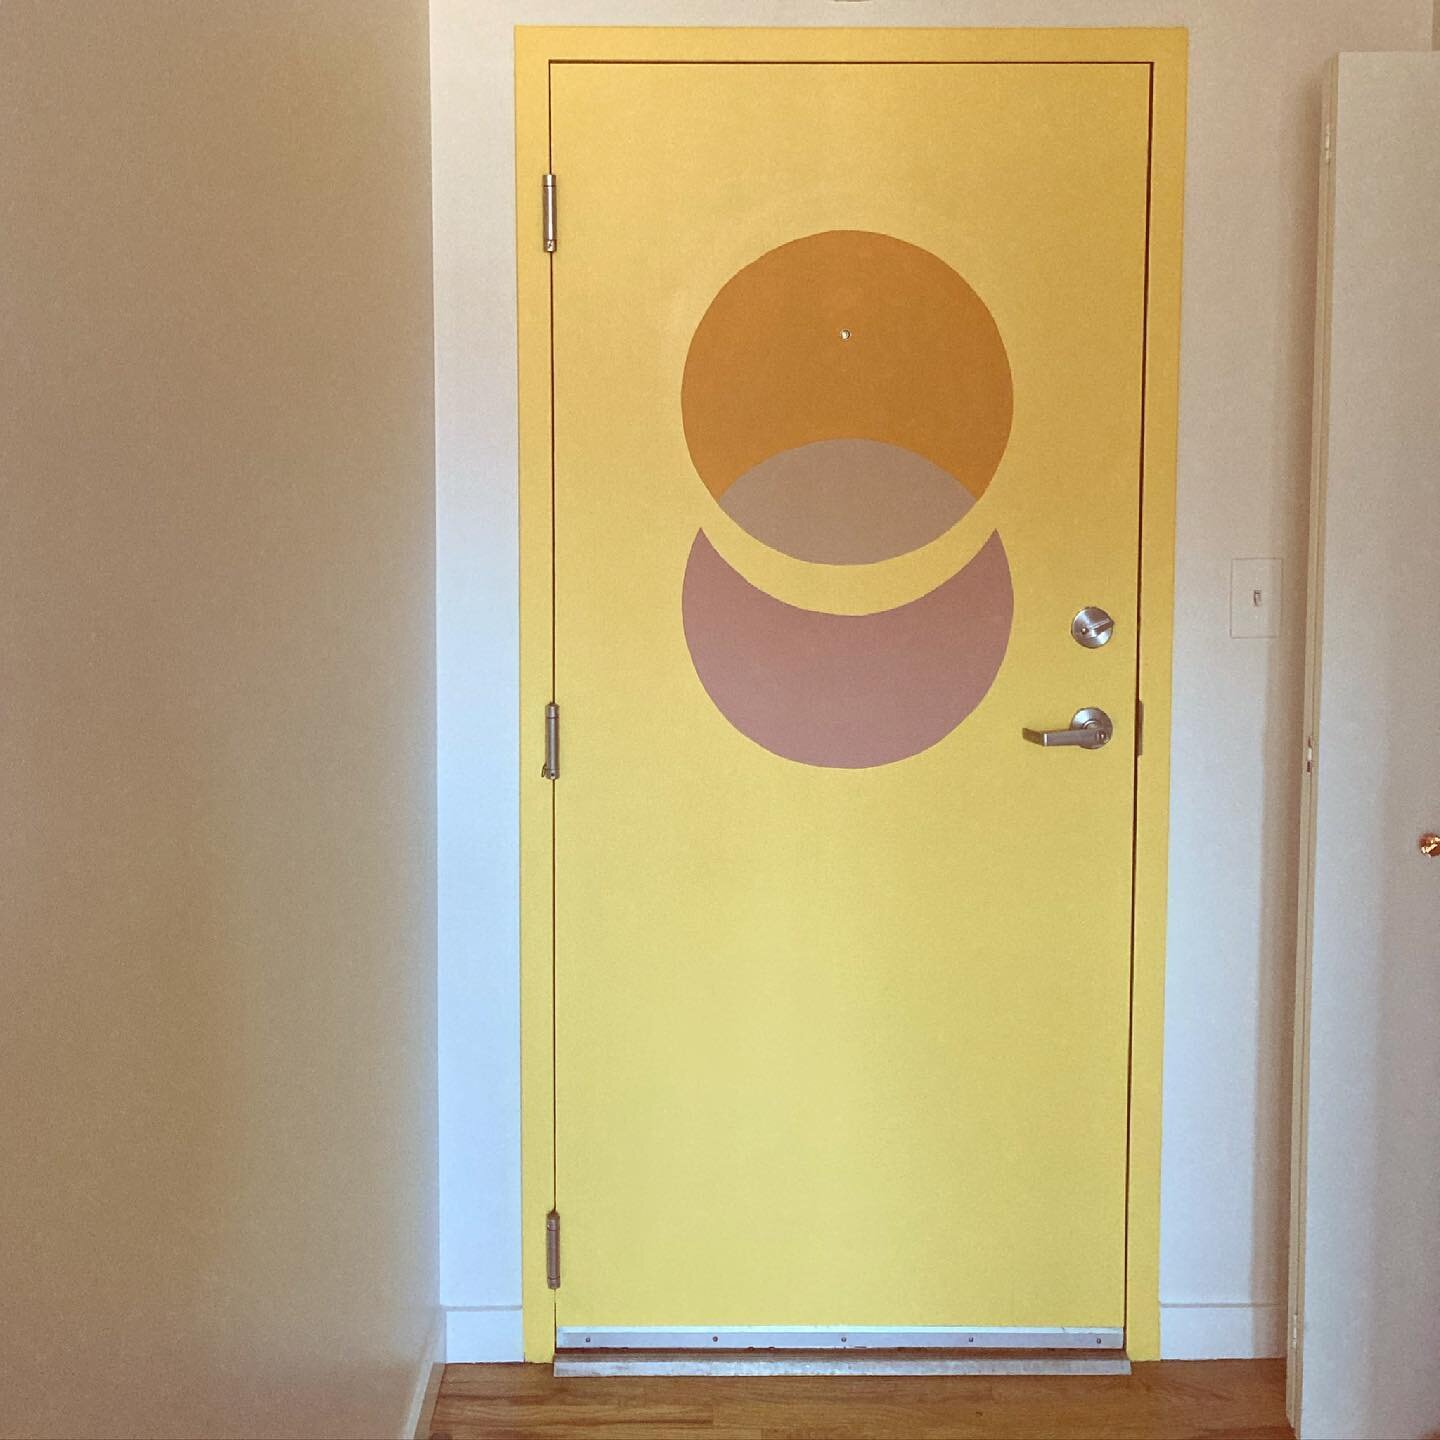 Day 89/100 of #the100dayproject

Mini door-mural is complete! Started on the lunar eclipse and finished on the solar eclipse, now every time I walk out the door I&rsquo;m reminded of enchantments, portals, phases, the possible. 
✨
✨
✨
#100DaysOfWorkI